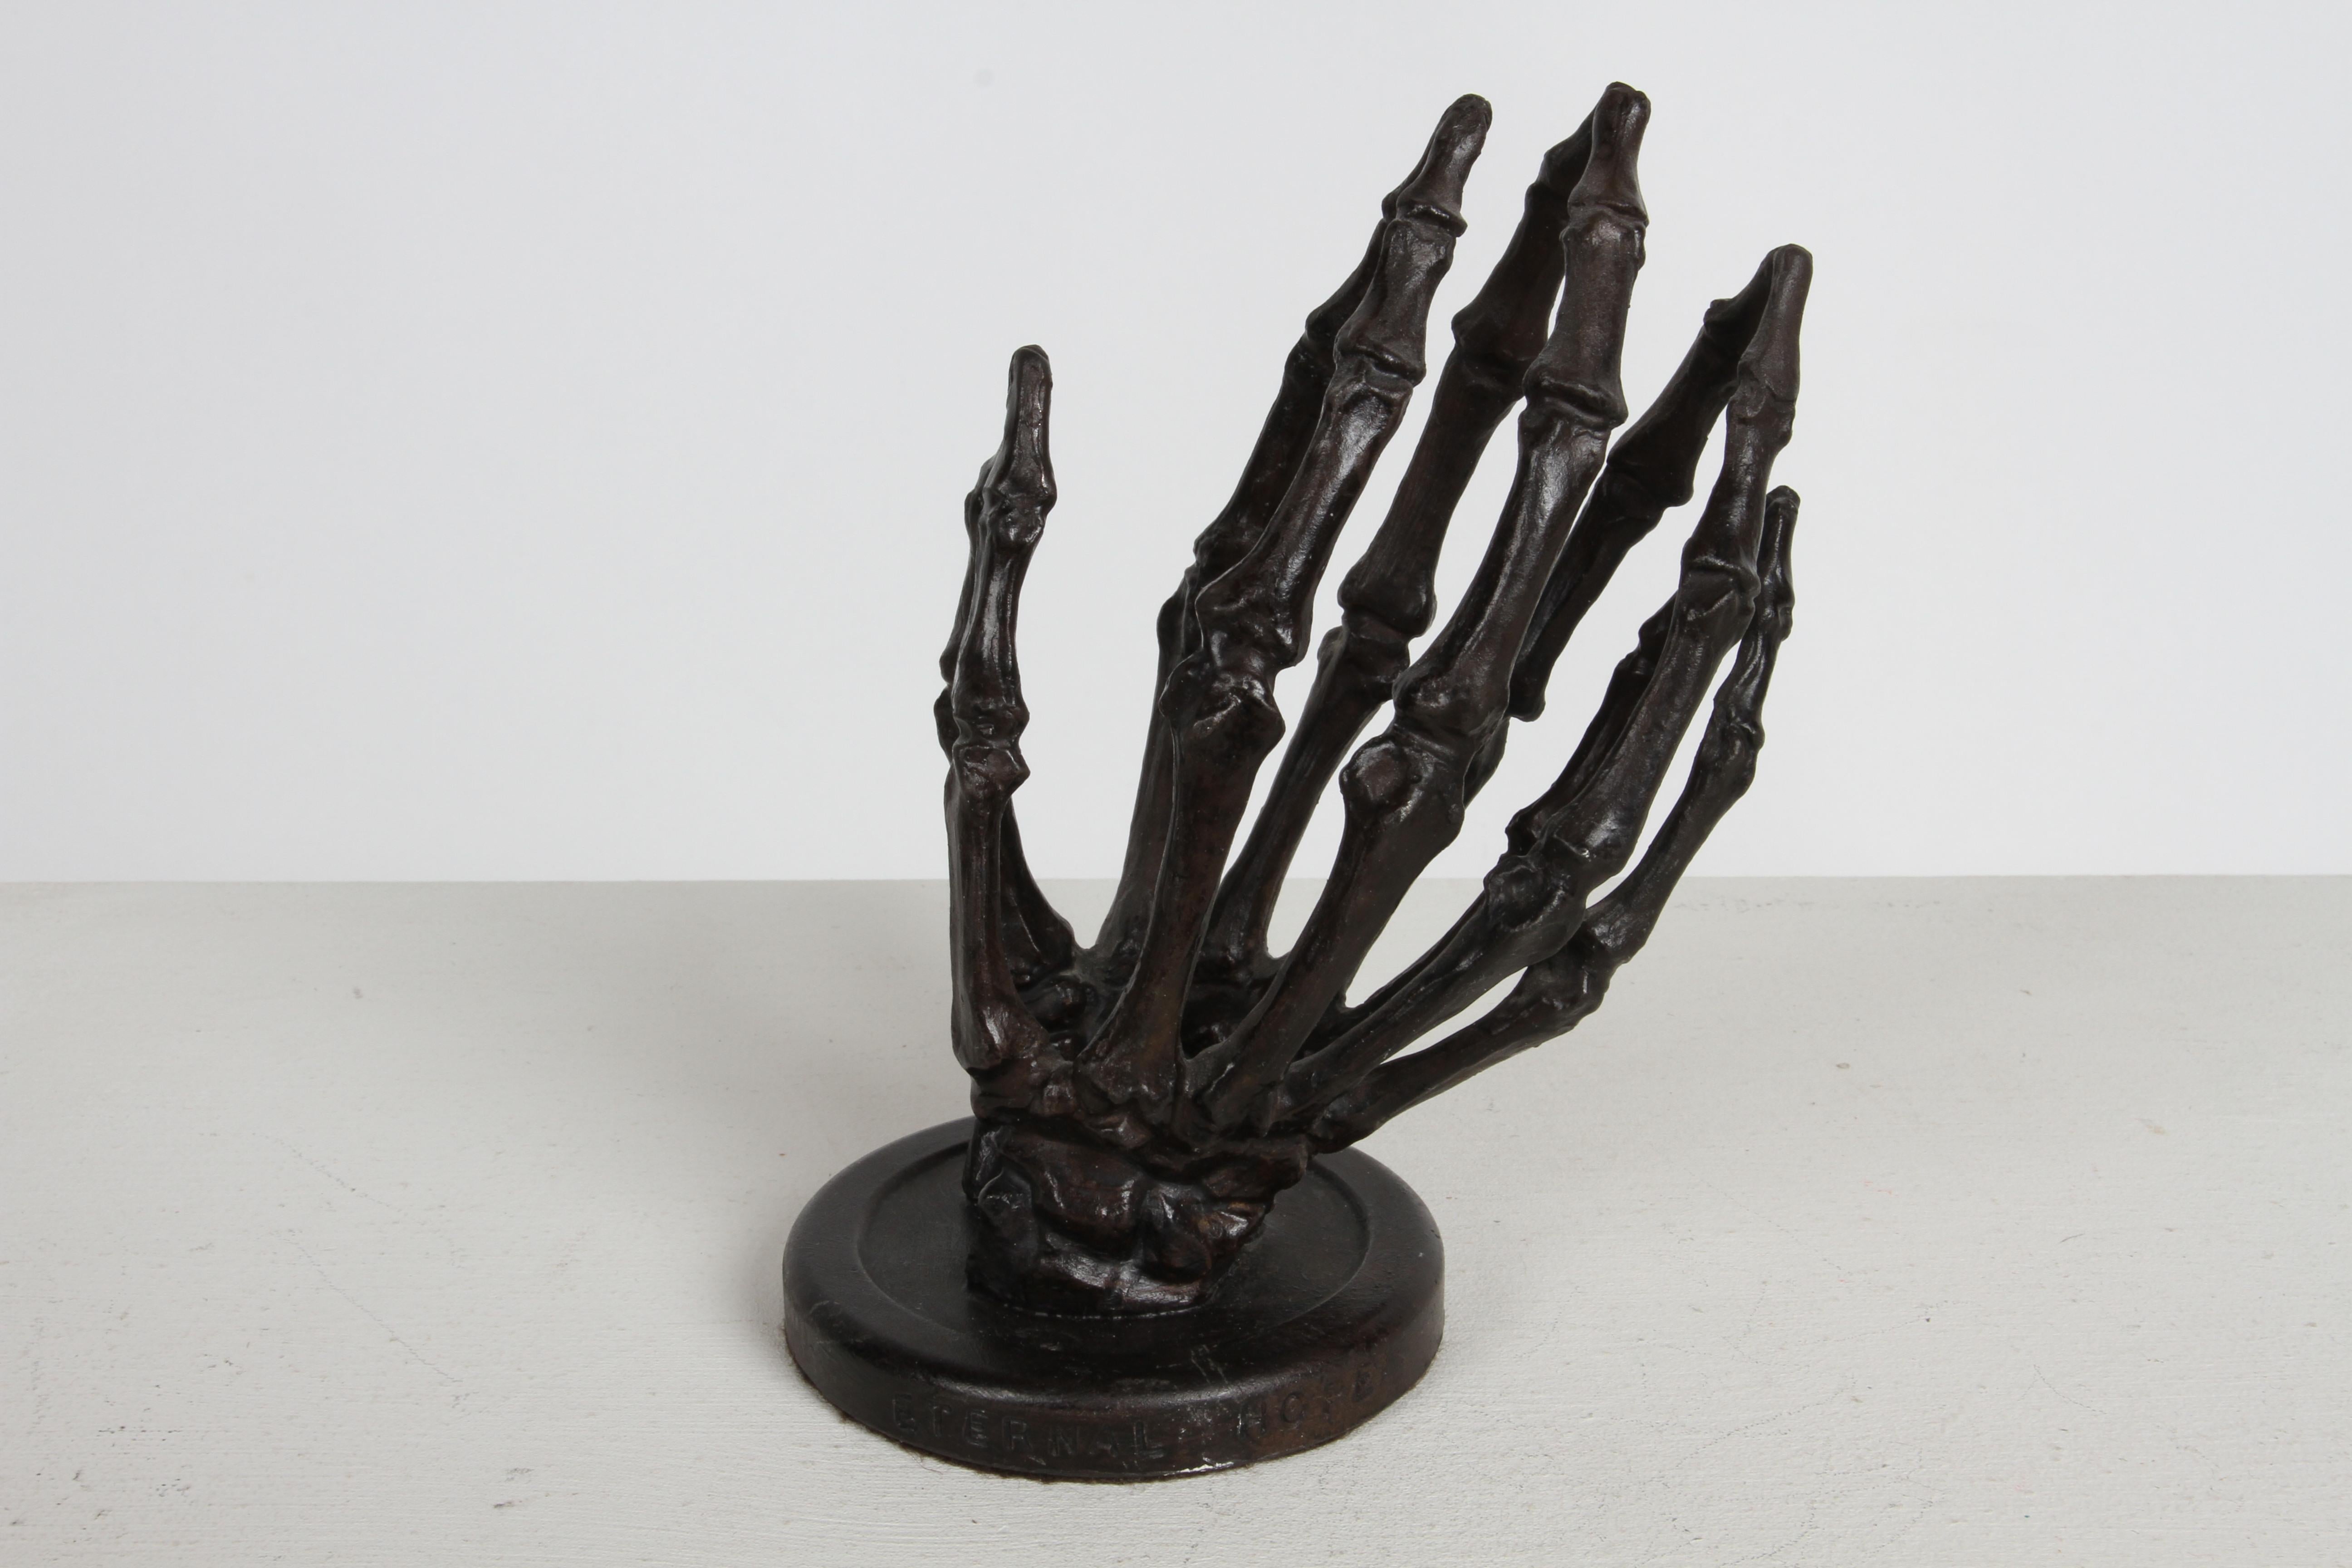 Cast bronze life size gothic skeleton / bone praying hands sculpture, titled on base Eternal Hope and signed Park '92. In the style of Blackman Cruz Workshop. 

